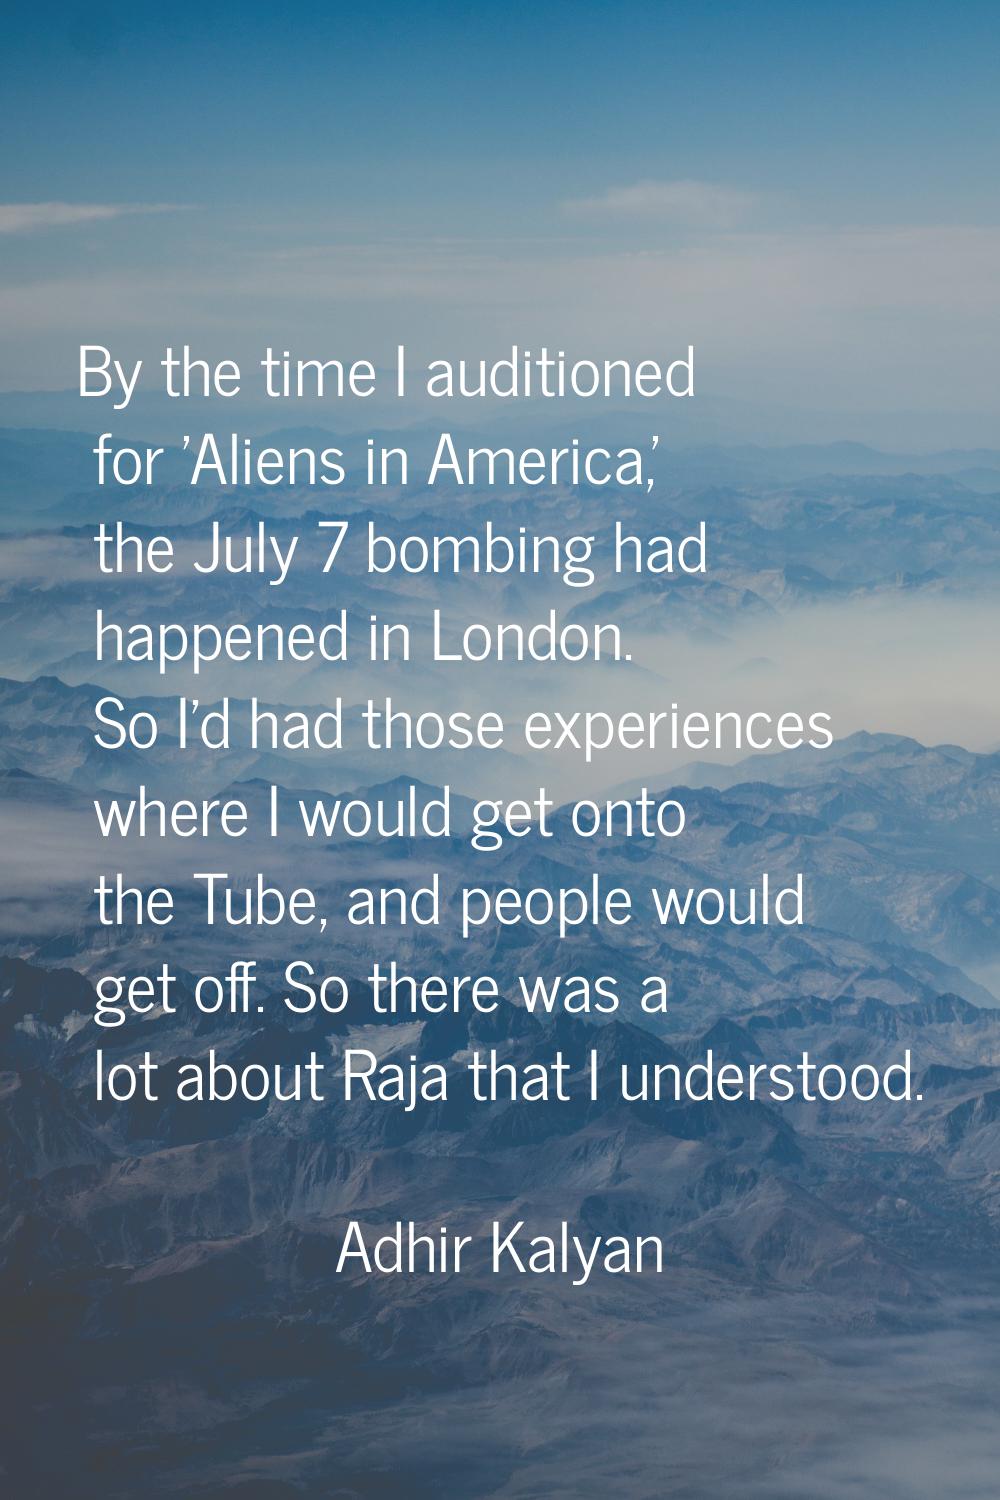 By the time I auditioned for 'Aliens in America,' the July 7 bombing had happened in London. So I'd